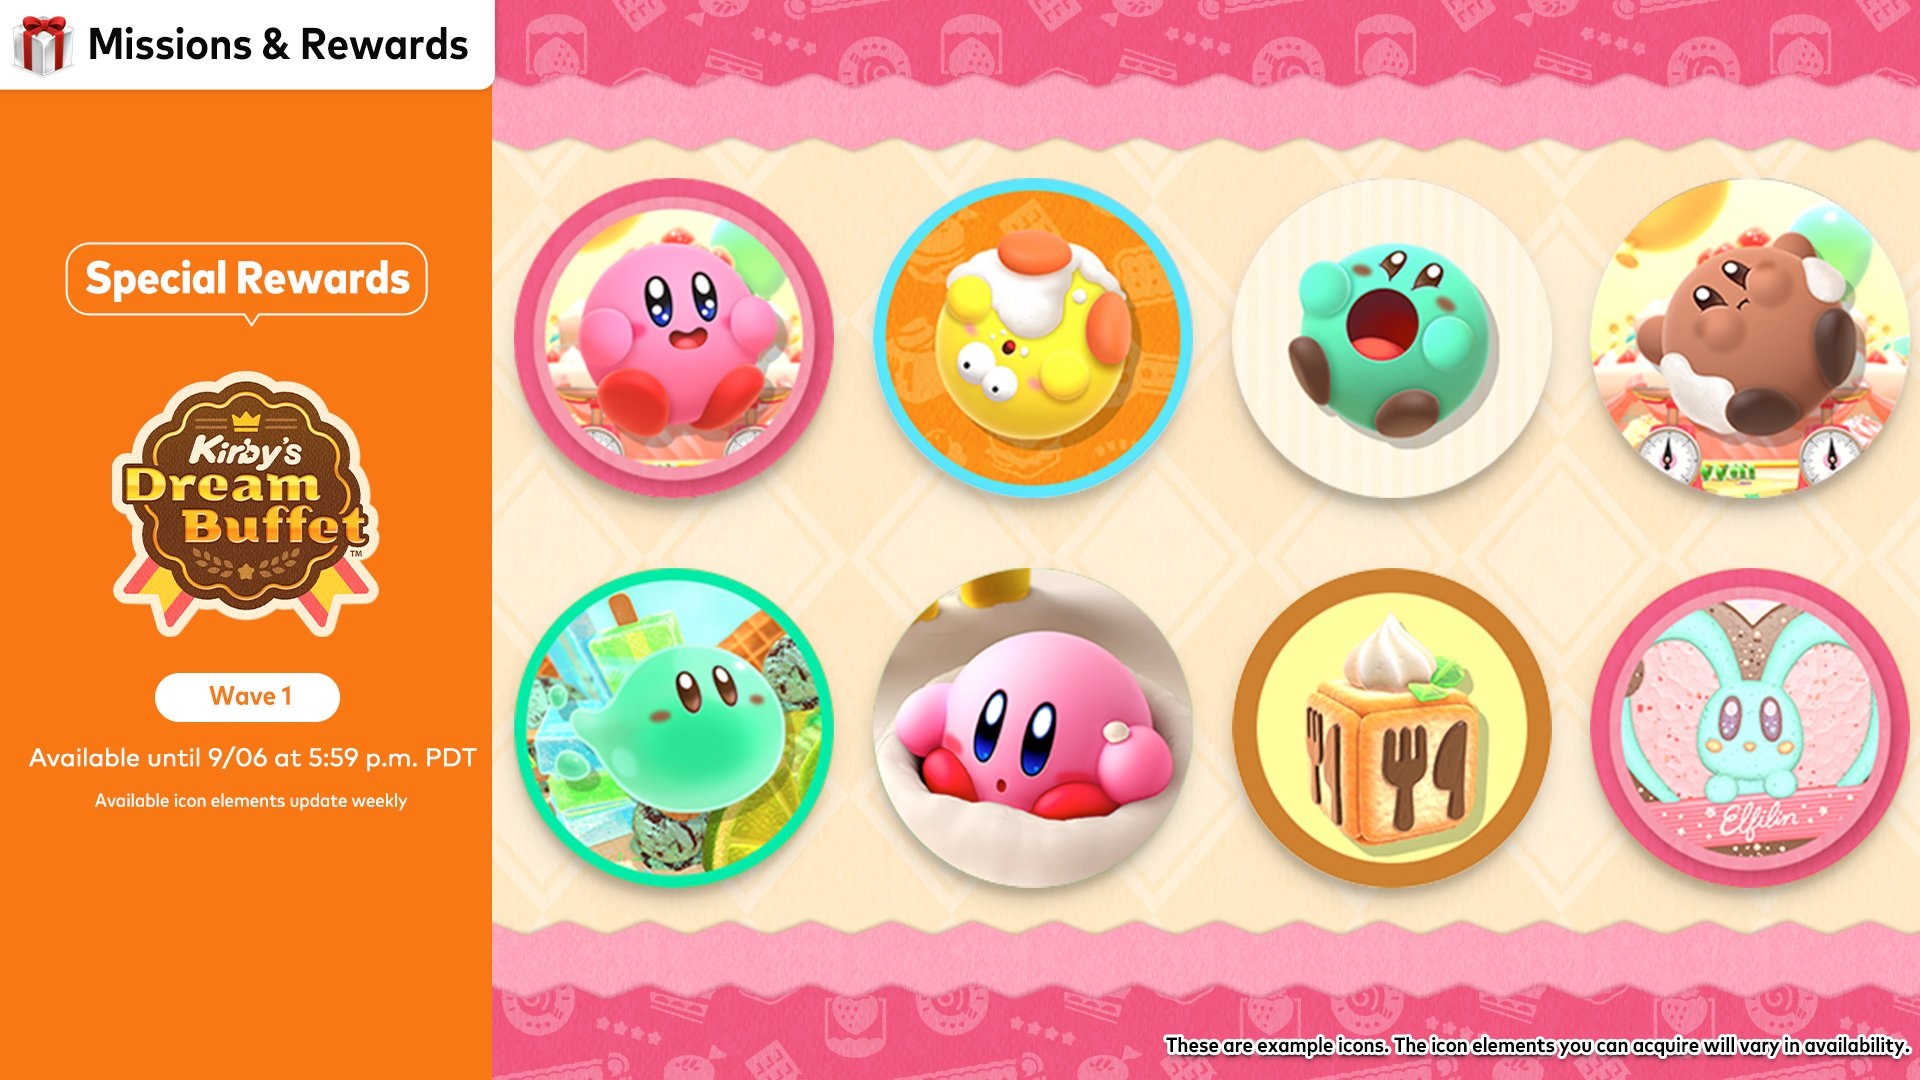 Kirby icons